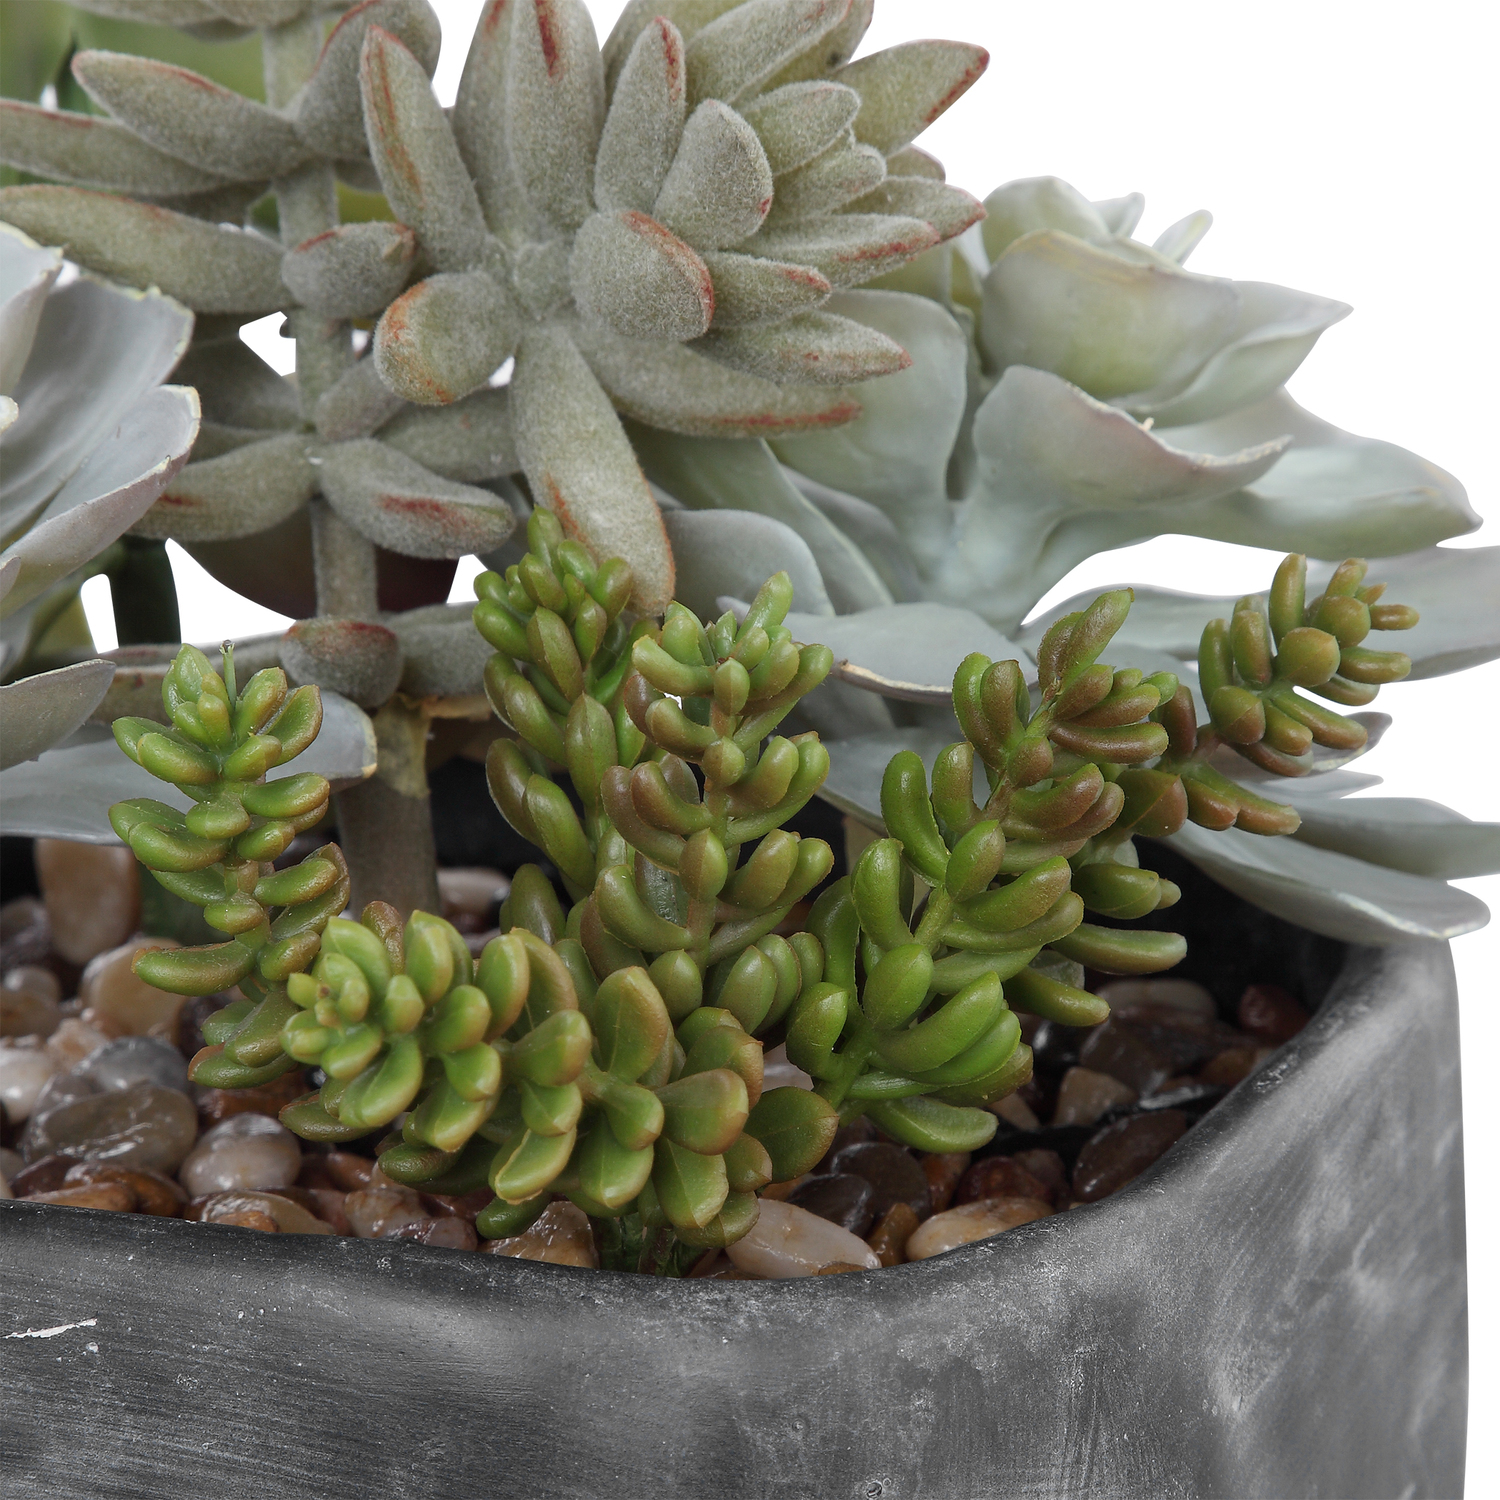 decorative boxwood Uttermost Artificial Flowers / Centerpiece A Contemporary Desert Garden Mix Of Succulents Accented With An Arid Bed Of Natural Pebbles In A Mottled Charcoal Gray Concrete Planter.